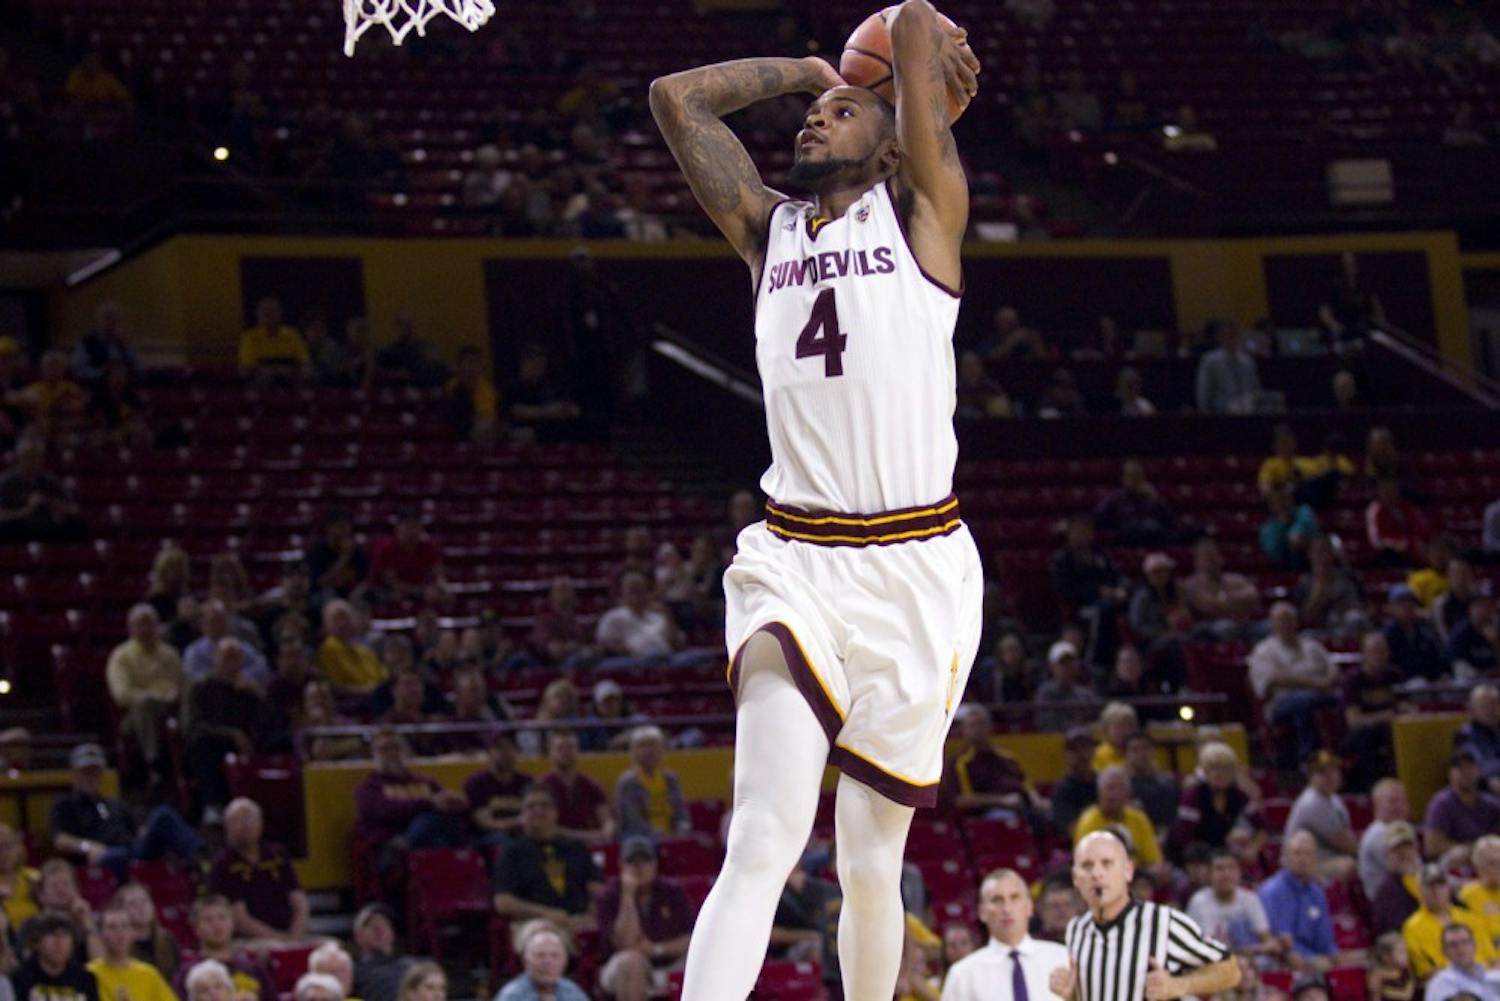 ASU senior guard Torian Graham (4) finishes a dunk in the second half of a 127-110 victory over the Citadel Bulldogs in Wells Fargo Arena in Tempe, Arizona on Wednesday, Nov. 23, 2016. Graham had 19 points in the victory.